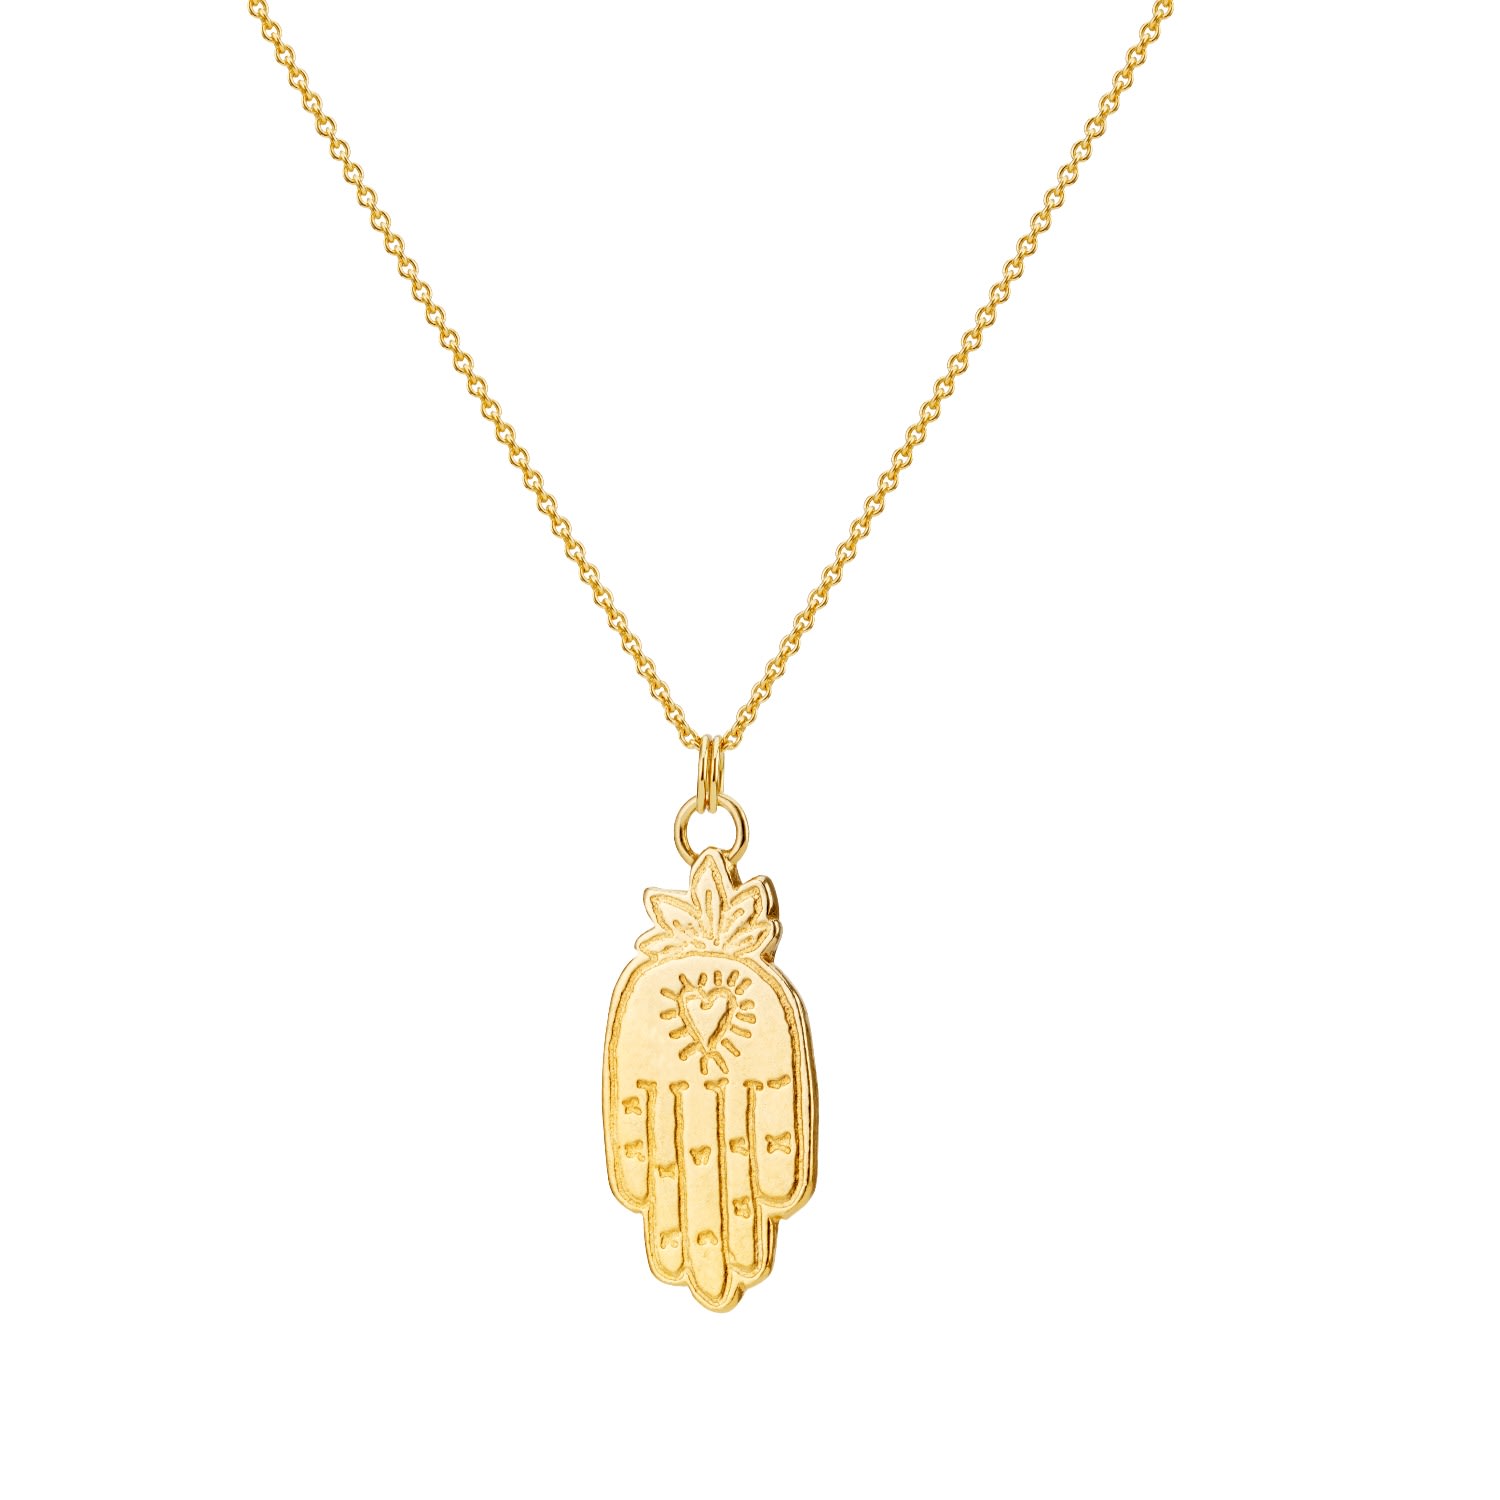 Women’s Gold Plated Large Hamsa Hand Necklace Posh Totty Designs